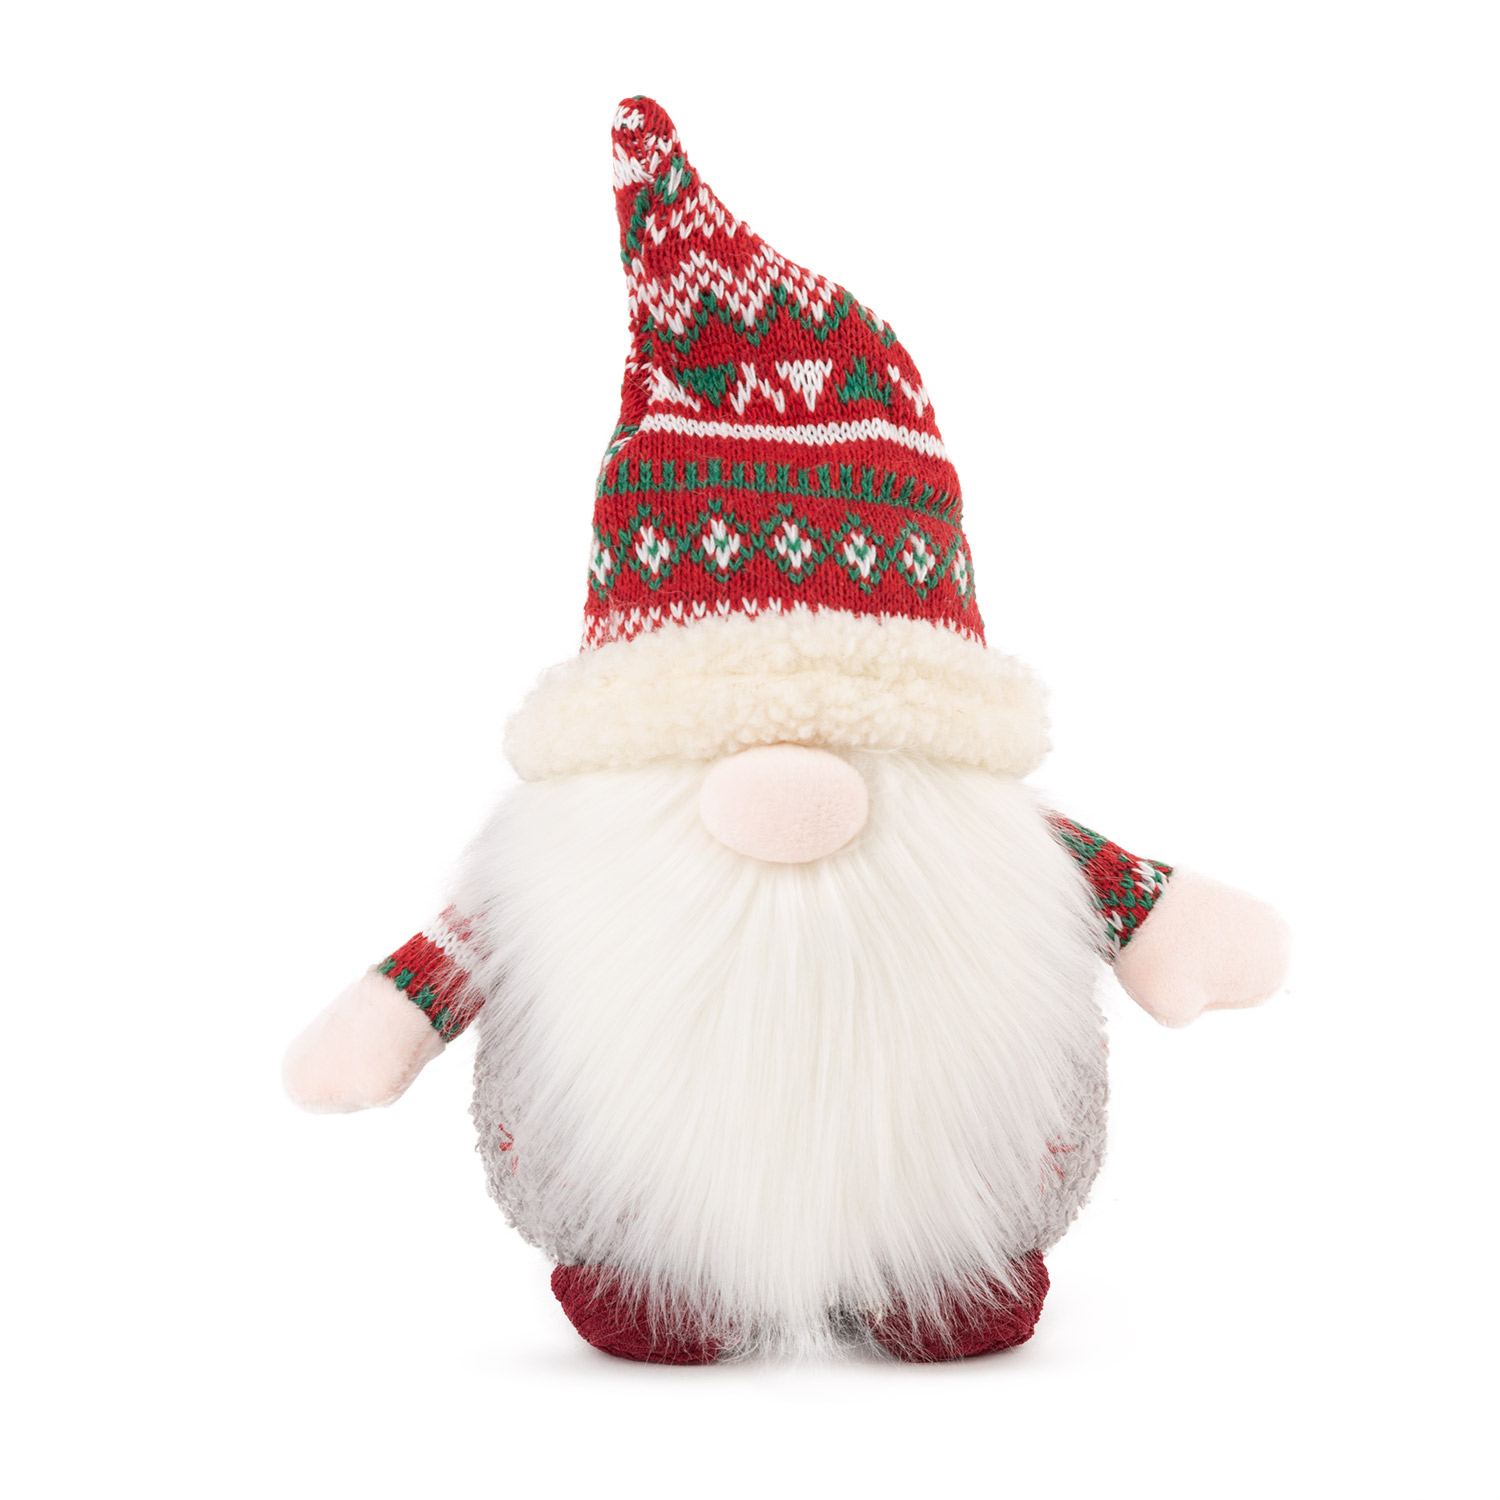 Christmas gnome with red hat